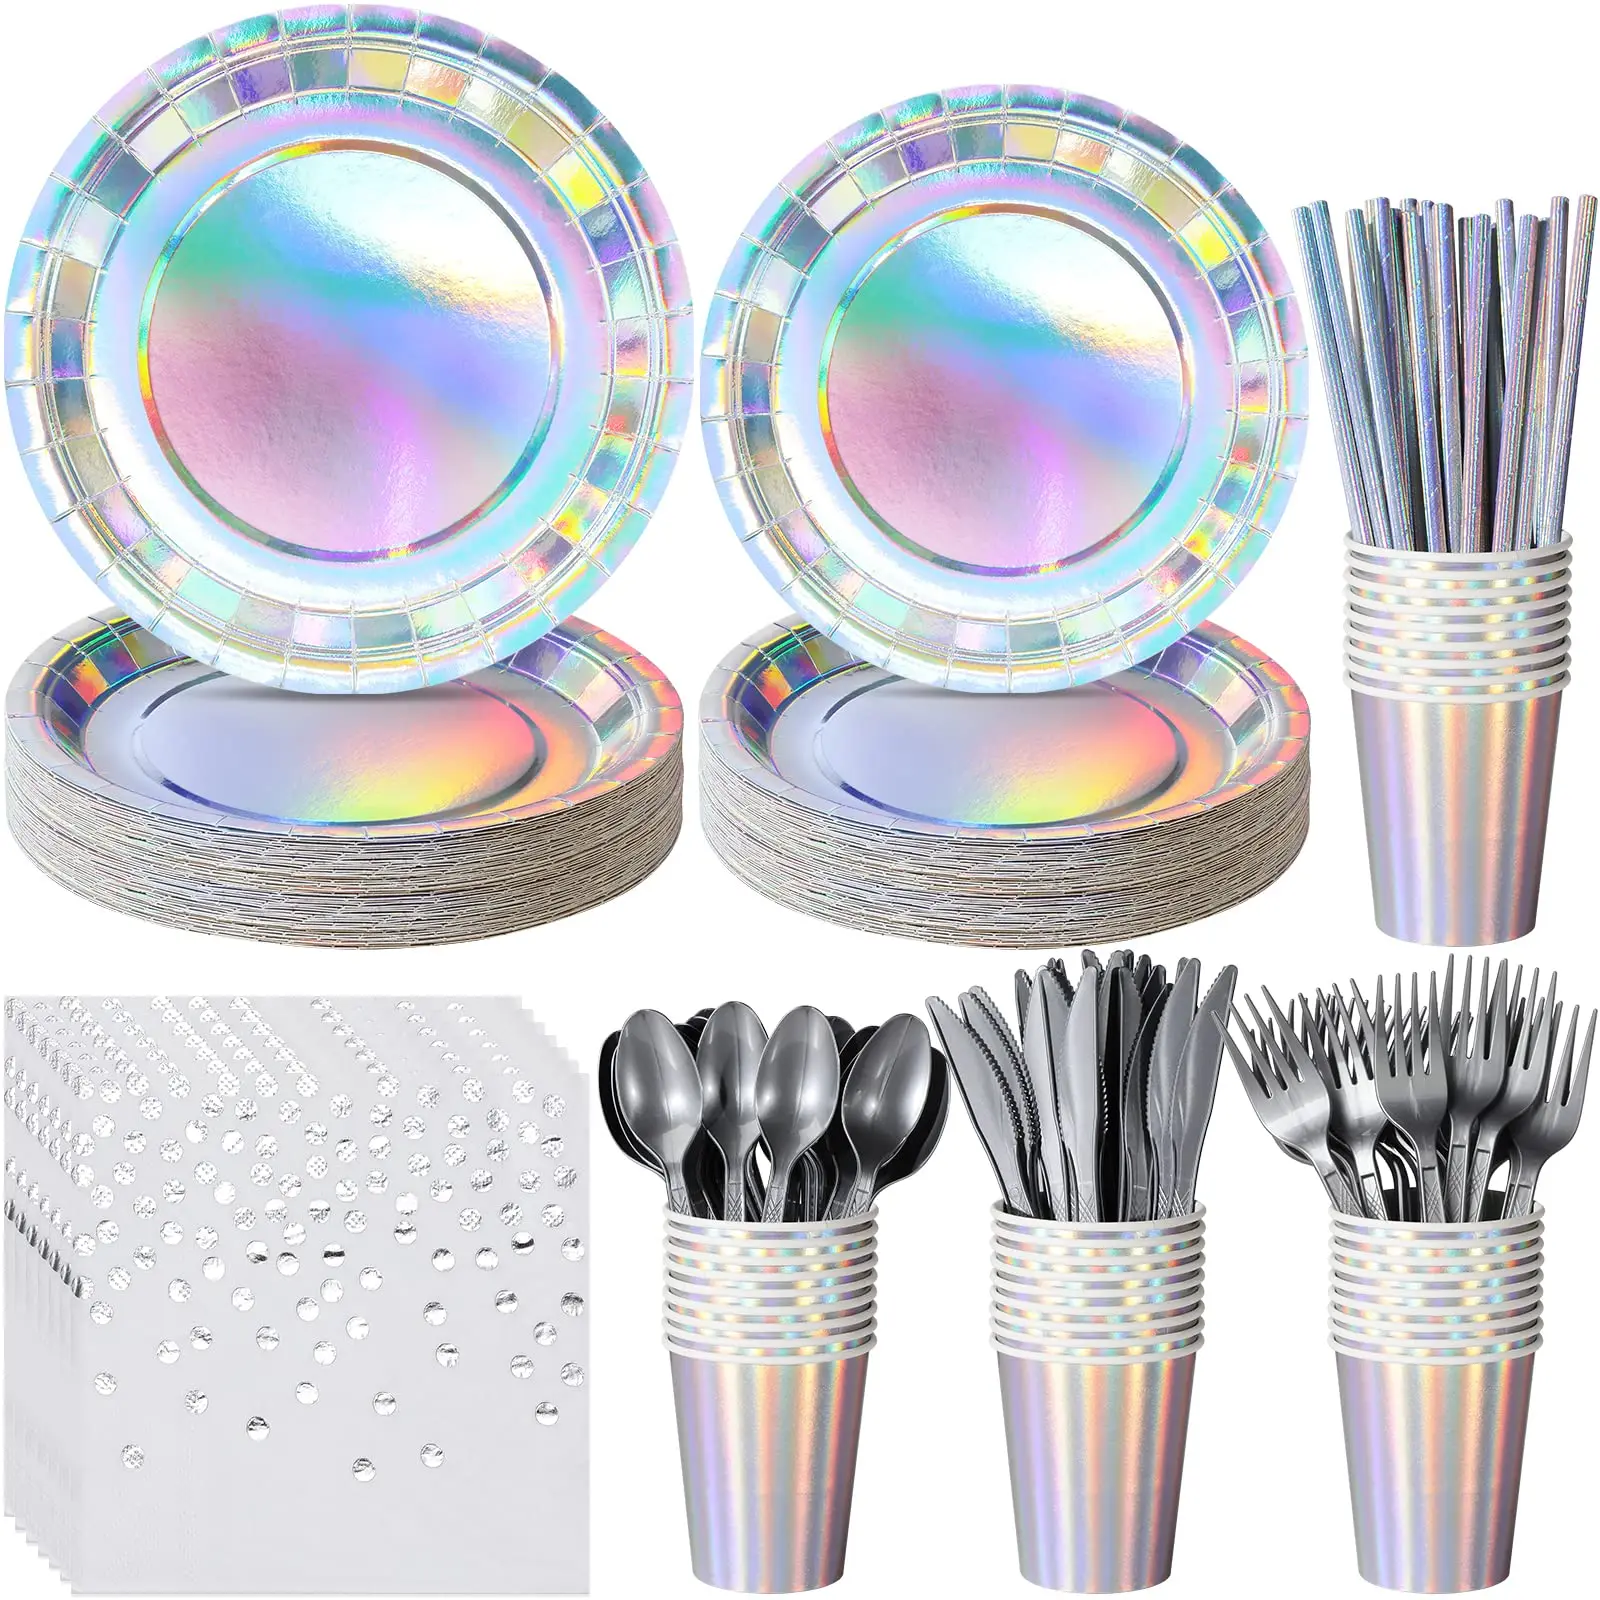 

Party Supplies Set: Decorative Paper Plates, Napkins, Disposable Iridescent Cups, Knives, Spoons, Forks, Straws - Serves 50